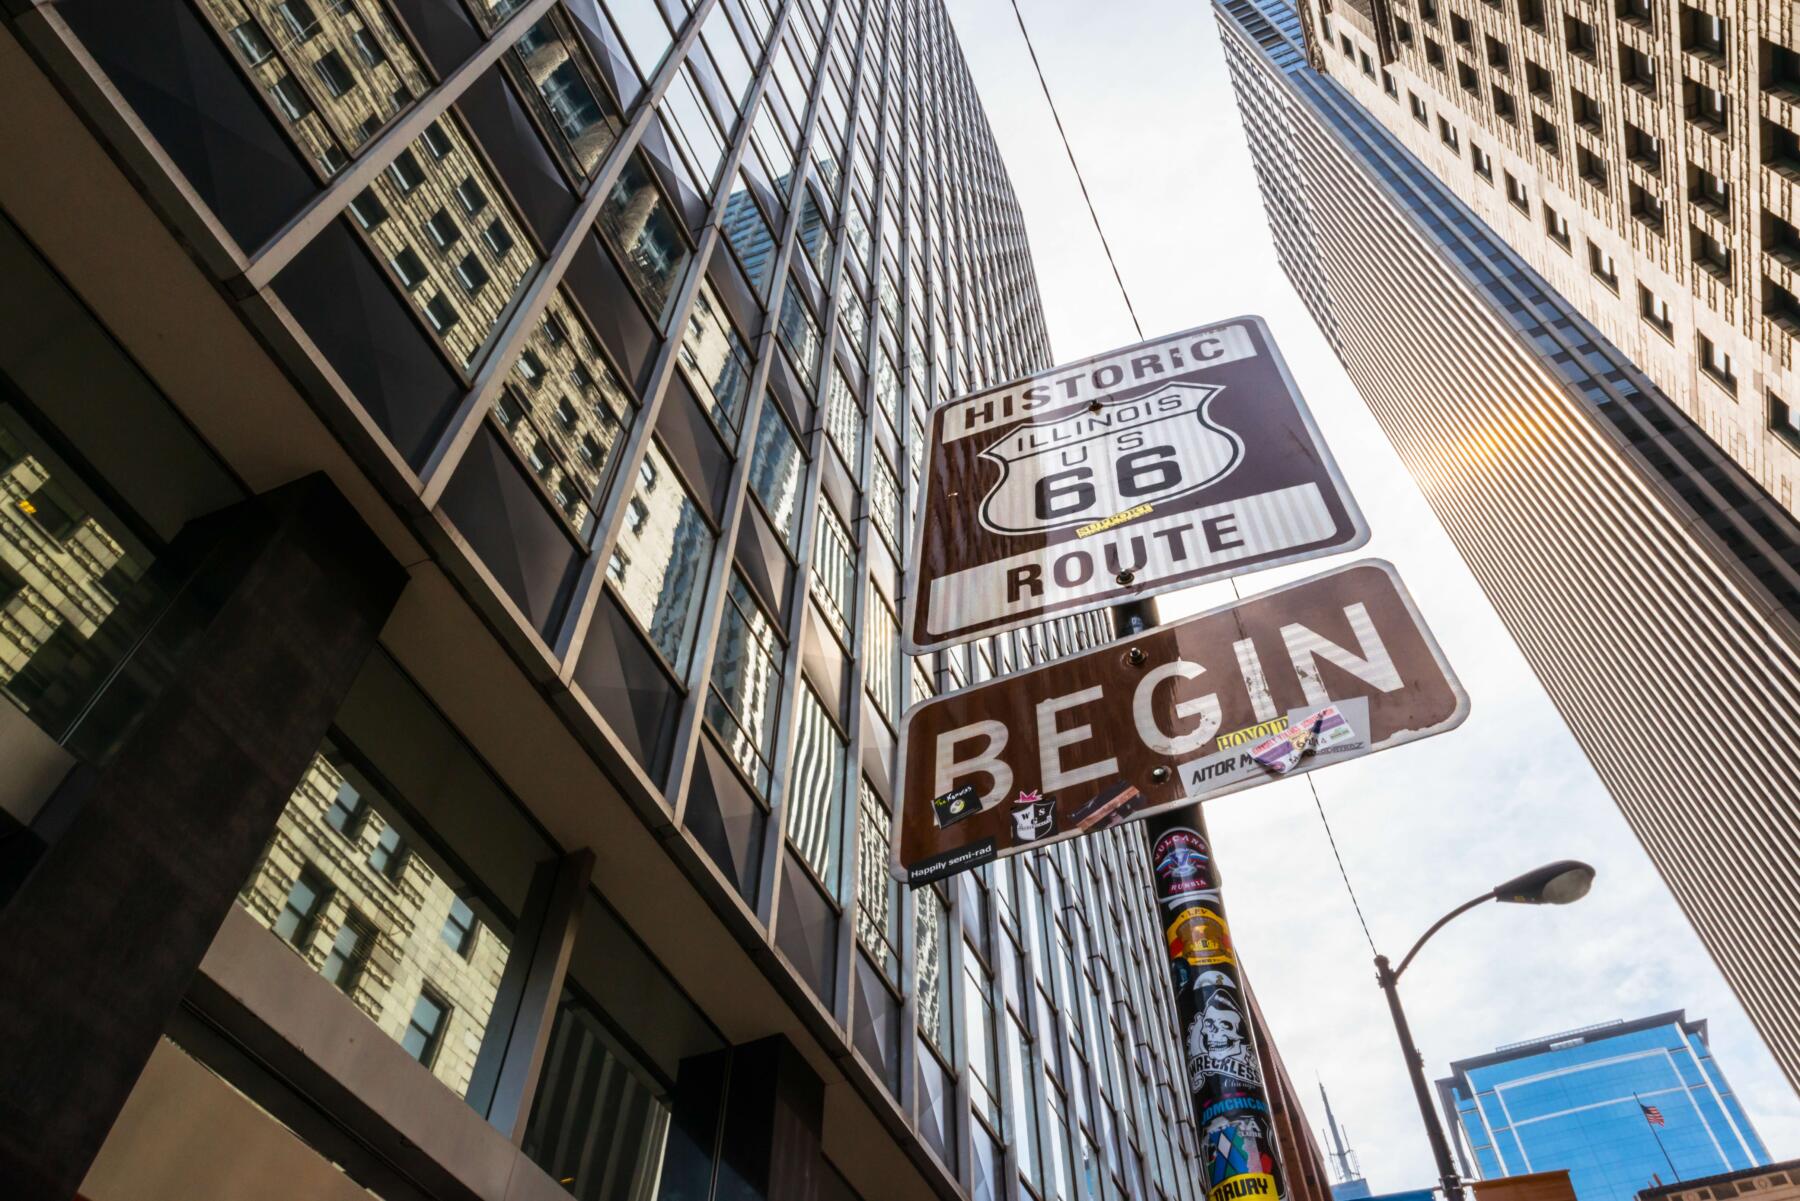 Route 66 sign in Chicago